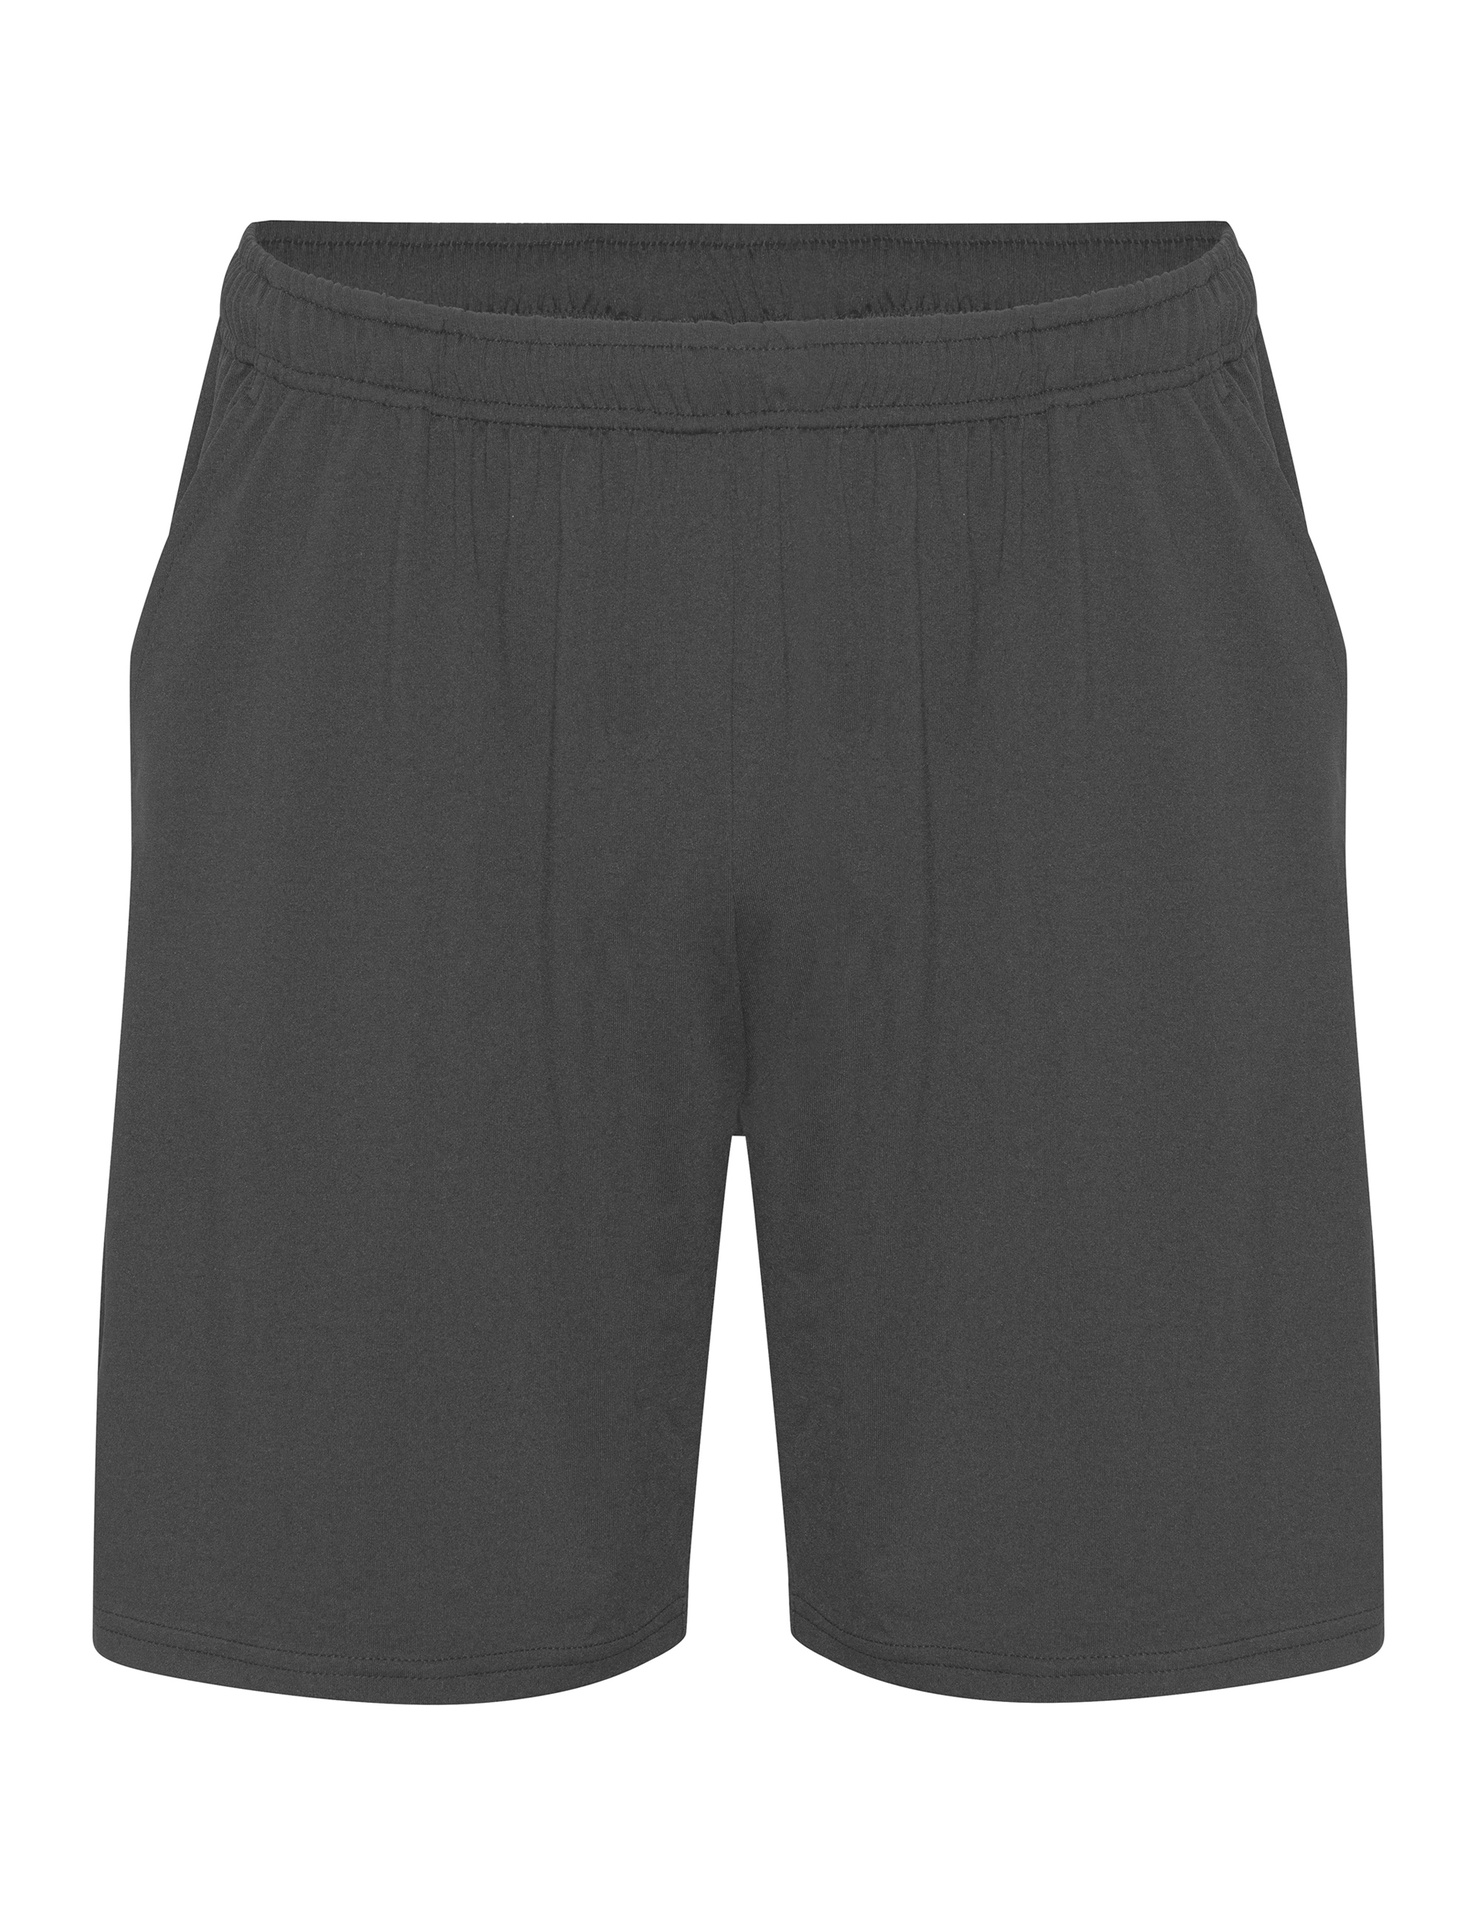 [PR/03874] Unisex Recycled Performance Shorts (Charcoal 06, XL)